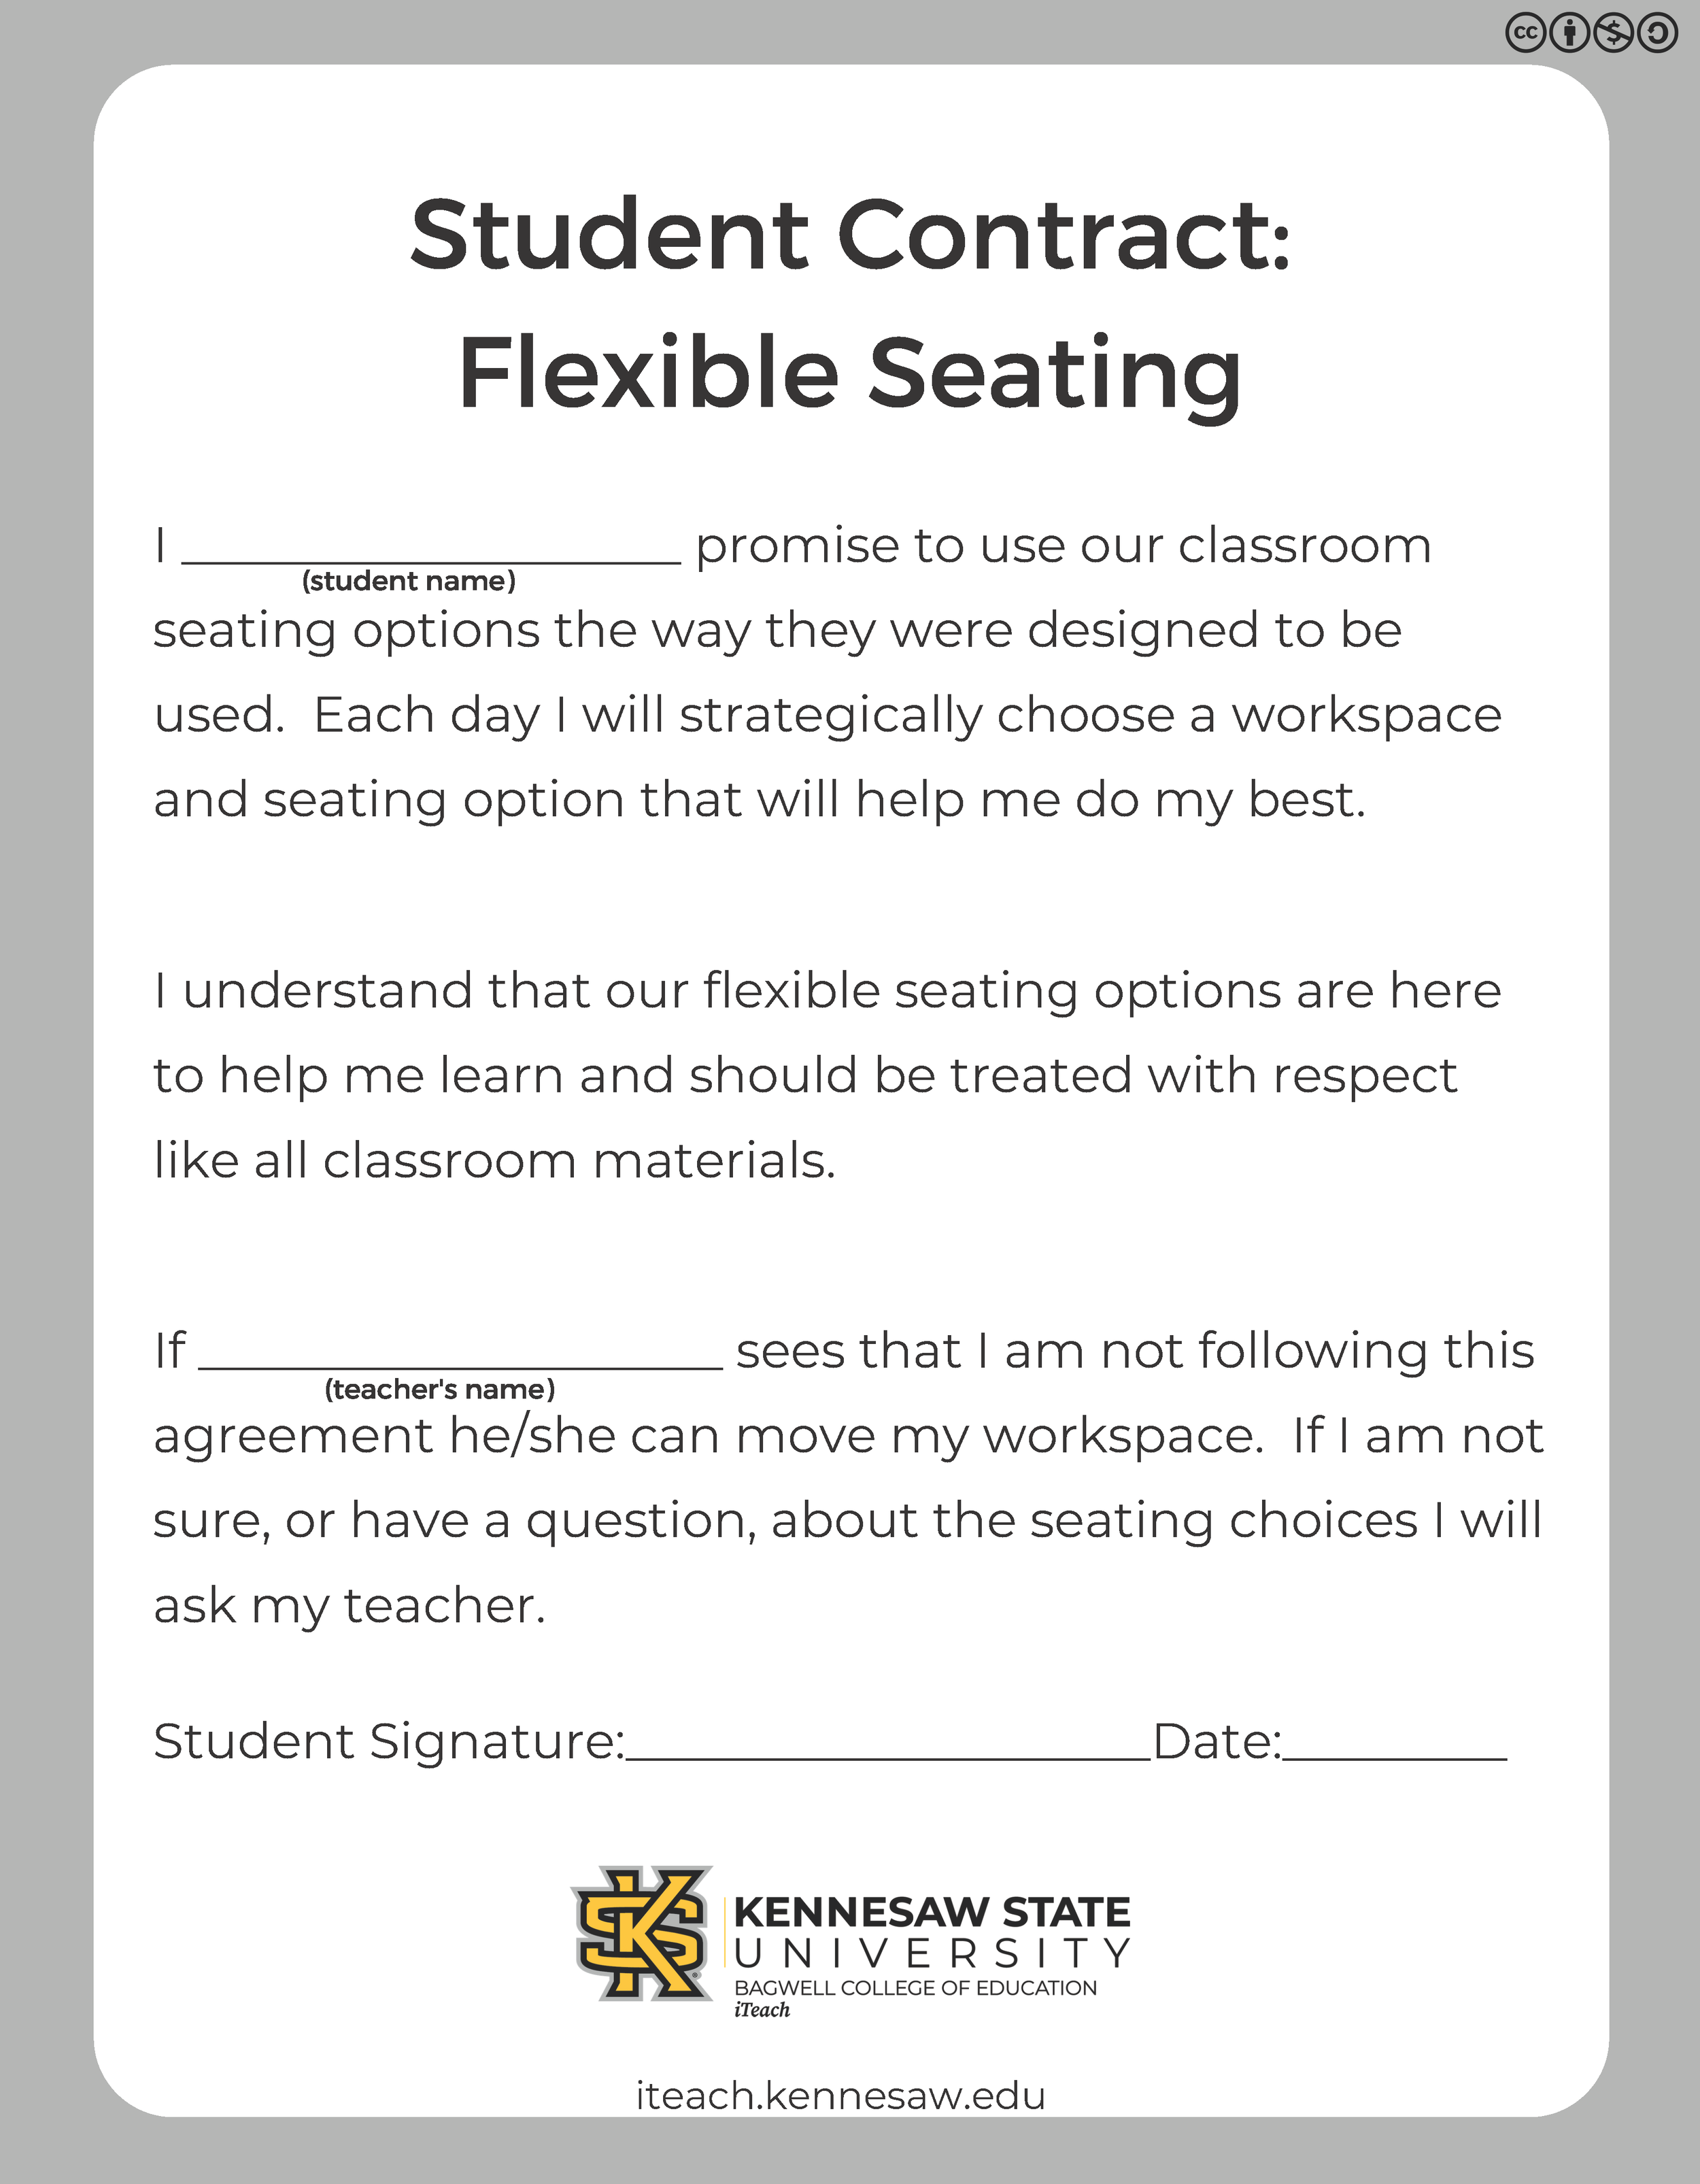 Flexible Seating Resource-Student Letter.png